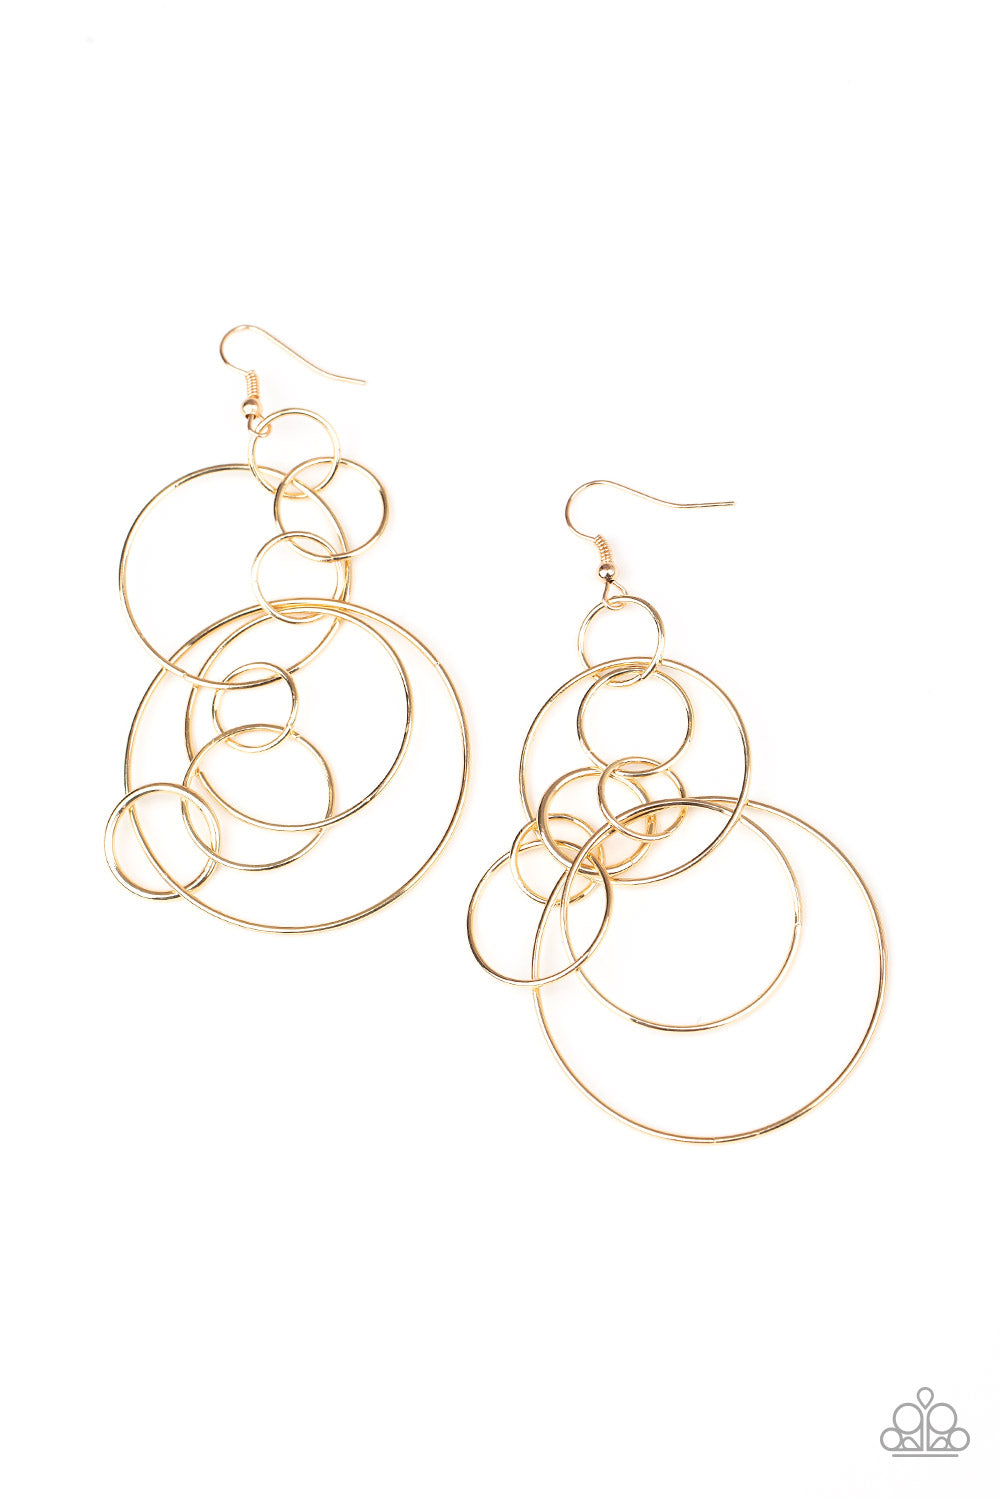 Running Circles Around You Gold-Earrings